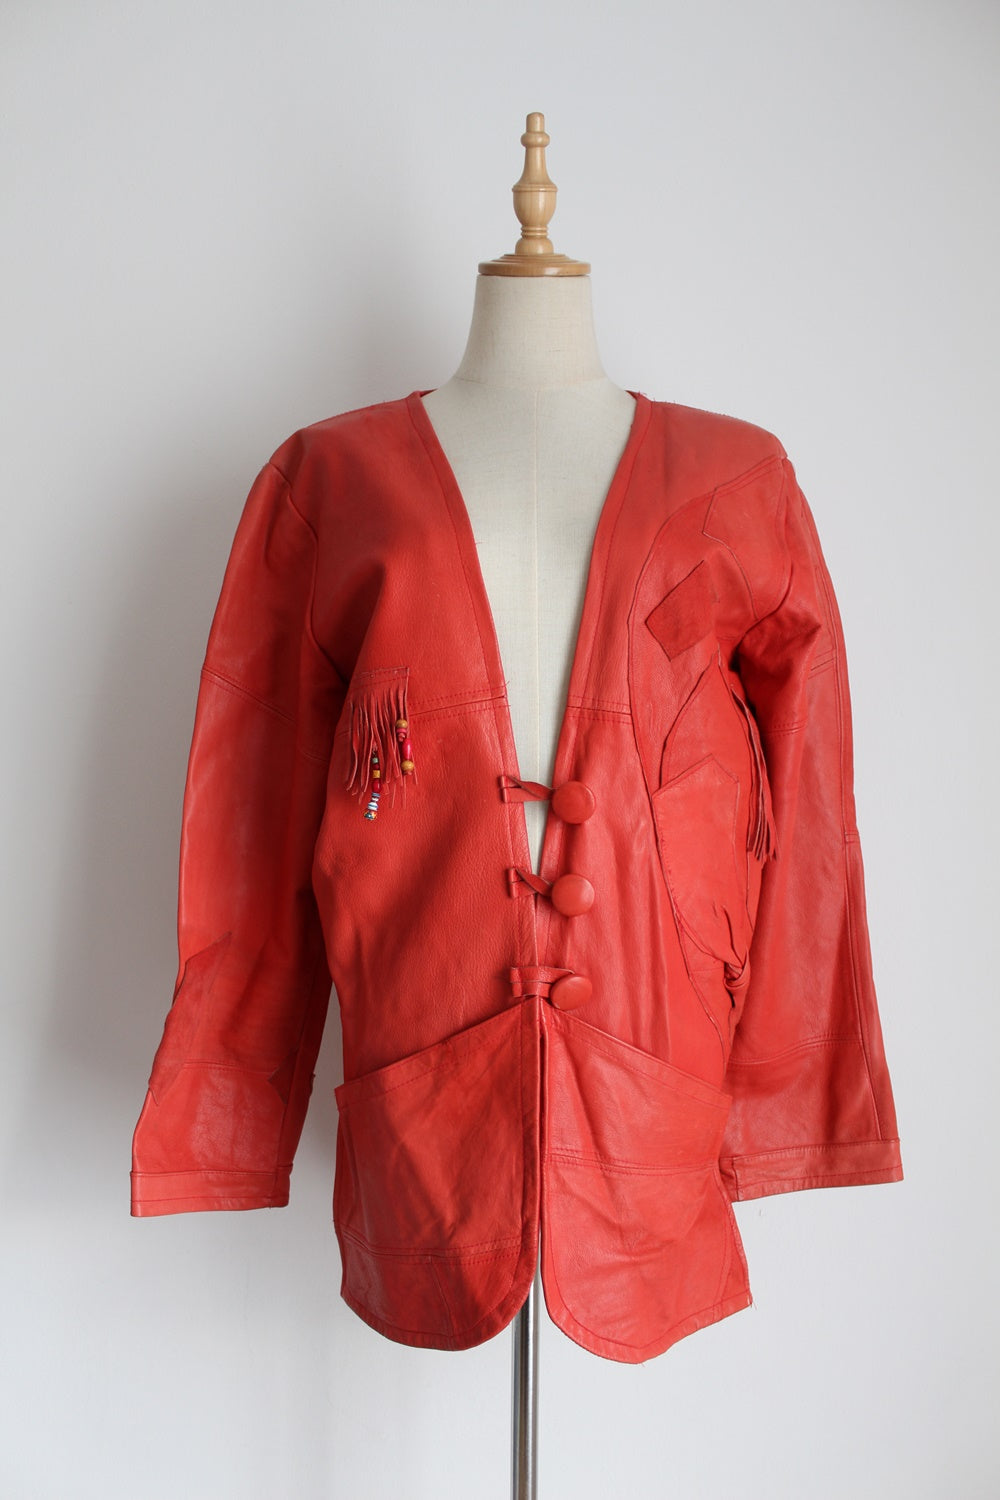 VINTAGE GENUINE LEATHER PATCH JACKET RED - SIZE 12